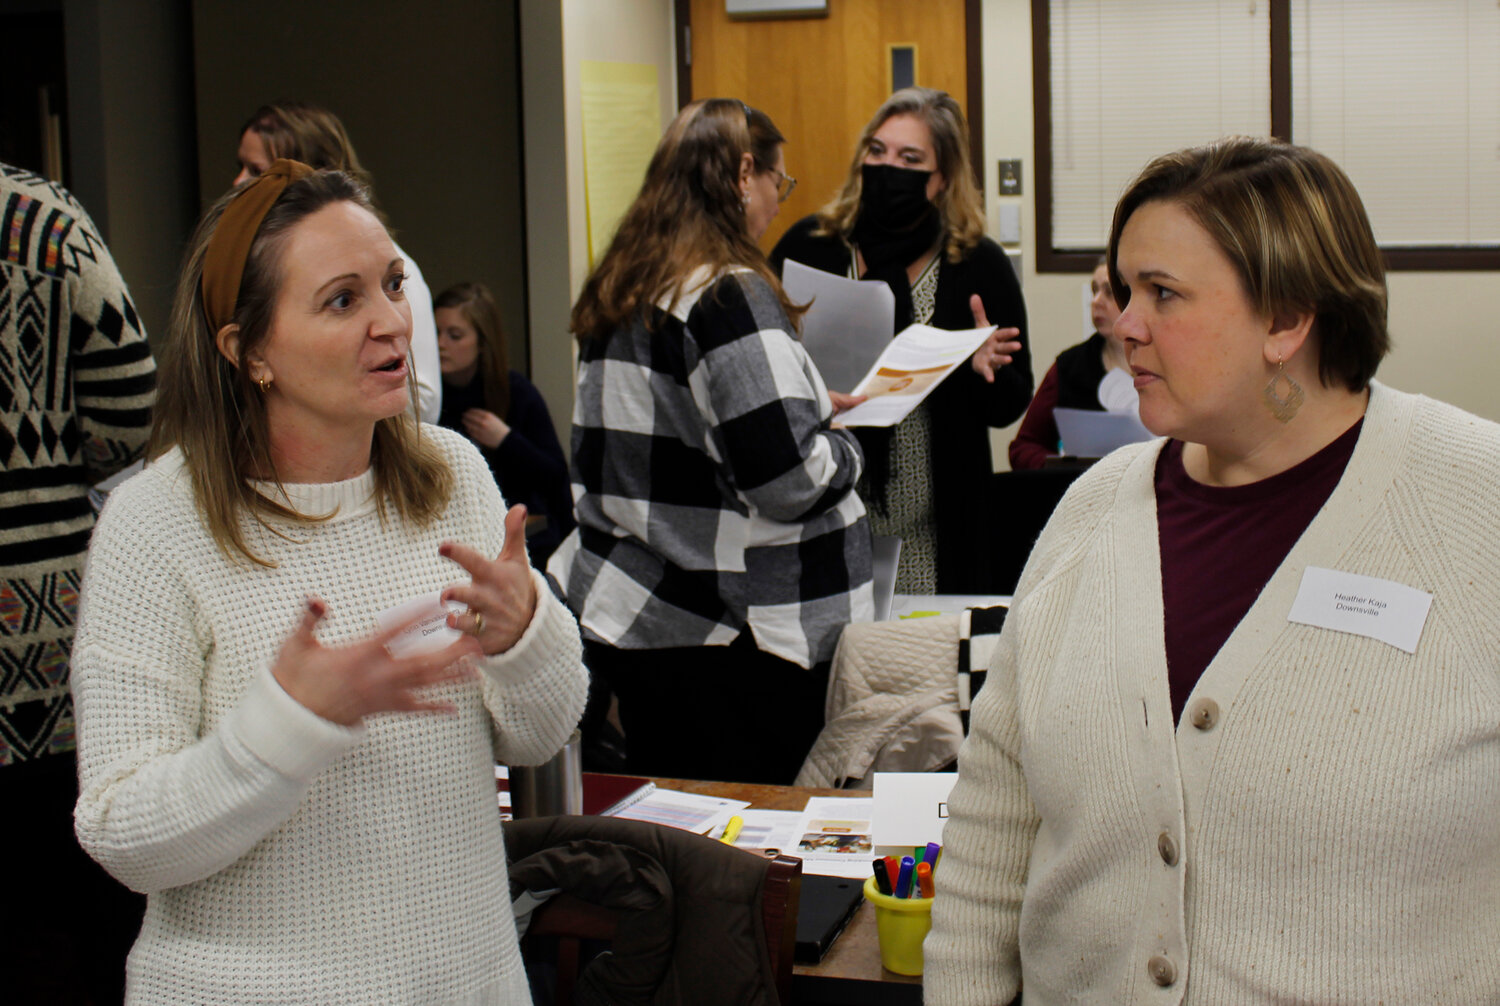 Facilitators at the DCMO BOCES Support Services Center lead discussion of literacy briefs during the NYS Literacy Initiative event held across the state Wednesday, Jan. 10.